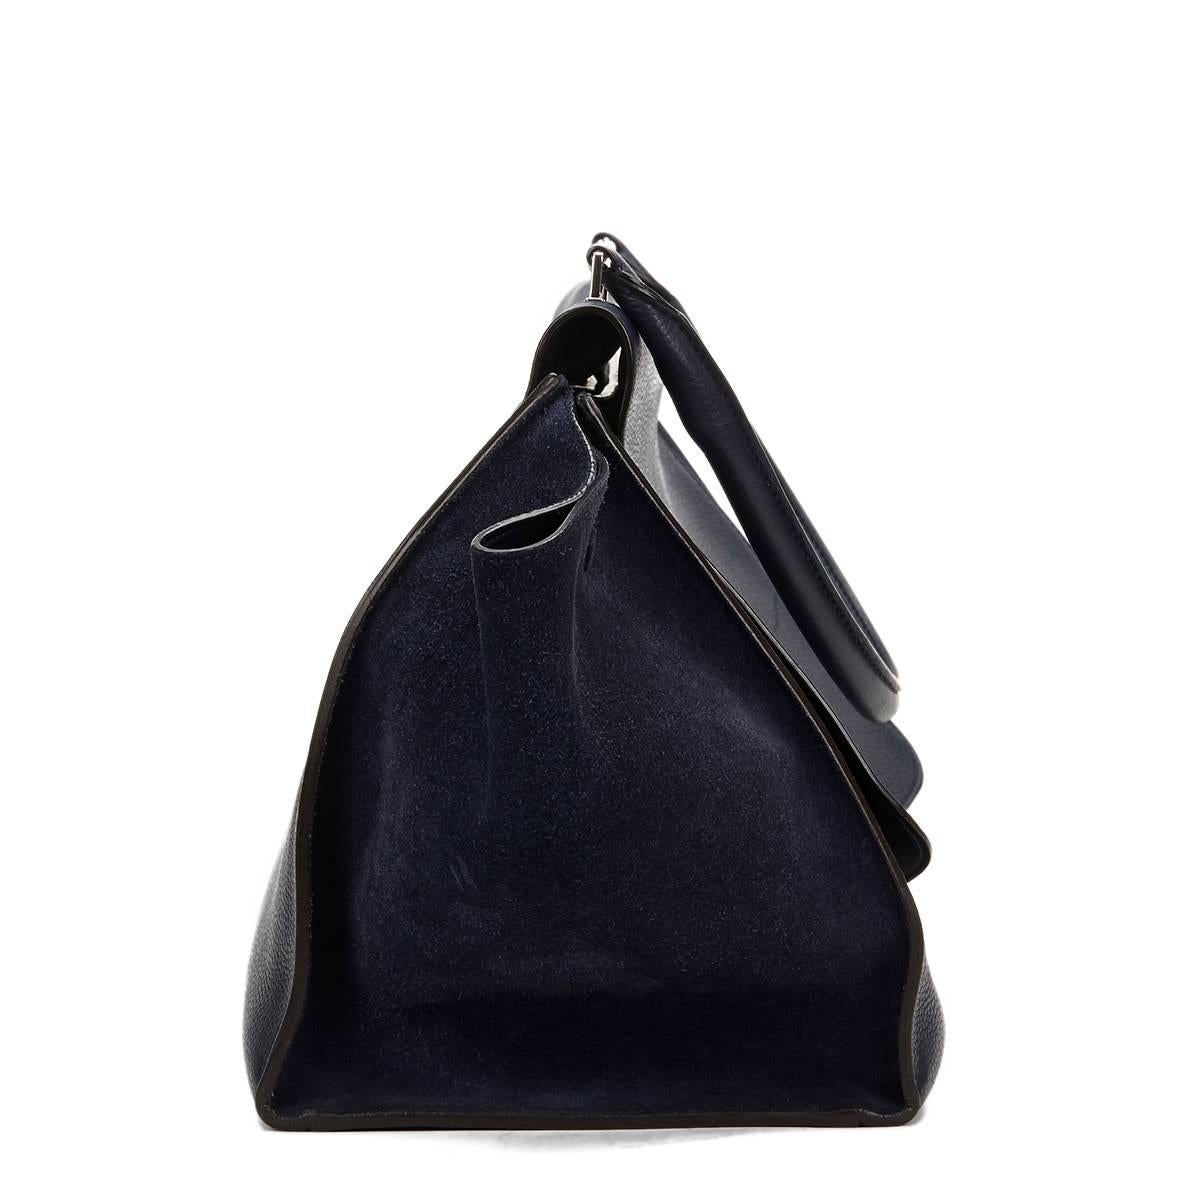 CÉLINE
Navy Drummed Calfskin Leather & Suede Large Trapeze

Reference: HB792
Serial Number: F-CU-0162
Age (Circa): 2012
Authenticity Details: Serial Tag (Made in Italy)
Gender: Ladies
Type: Shoulder, Top Handle

Colour: Navy
Hardware: